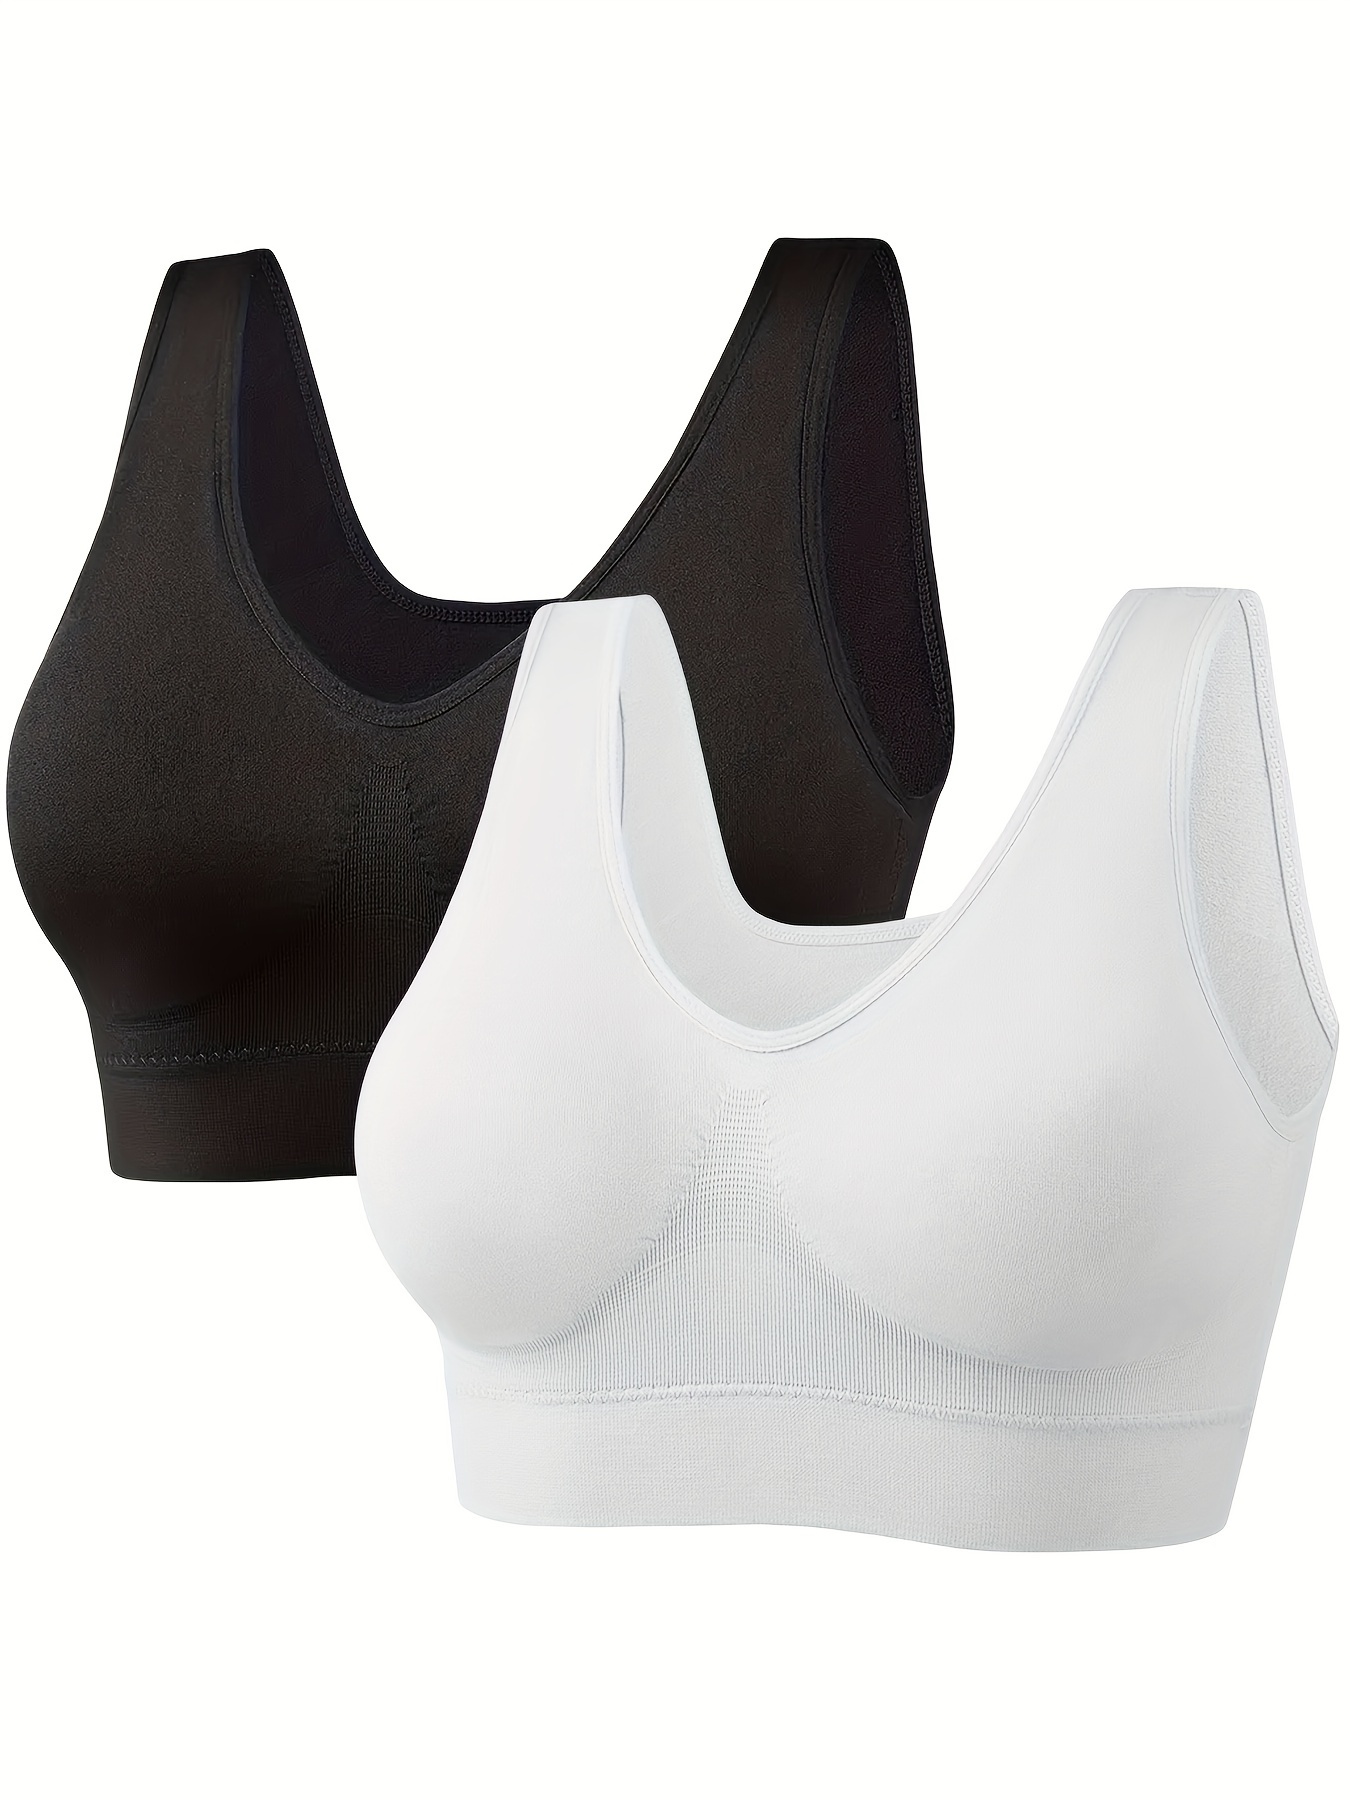 nsendm Female Underwear Adult Sports Bras Pack for Women Pack Of 3